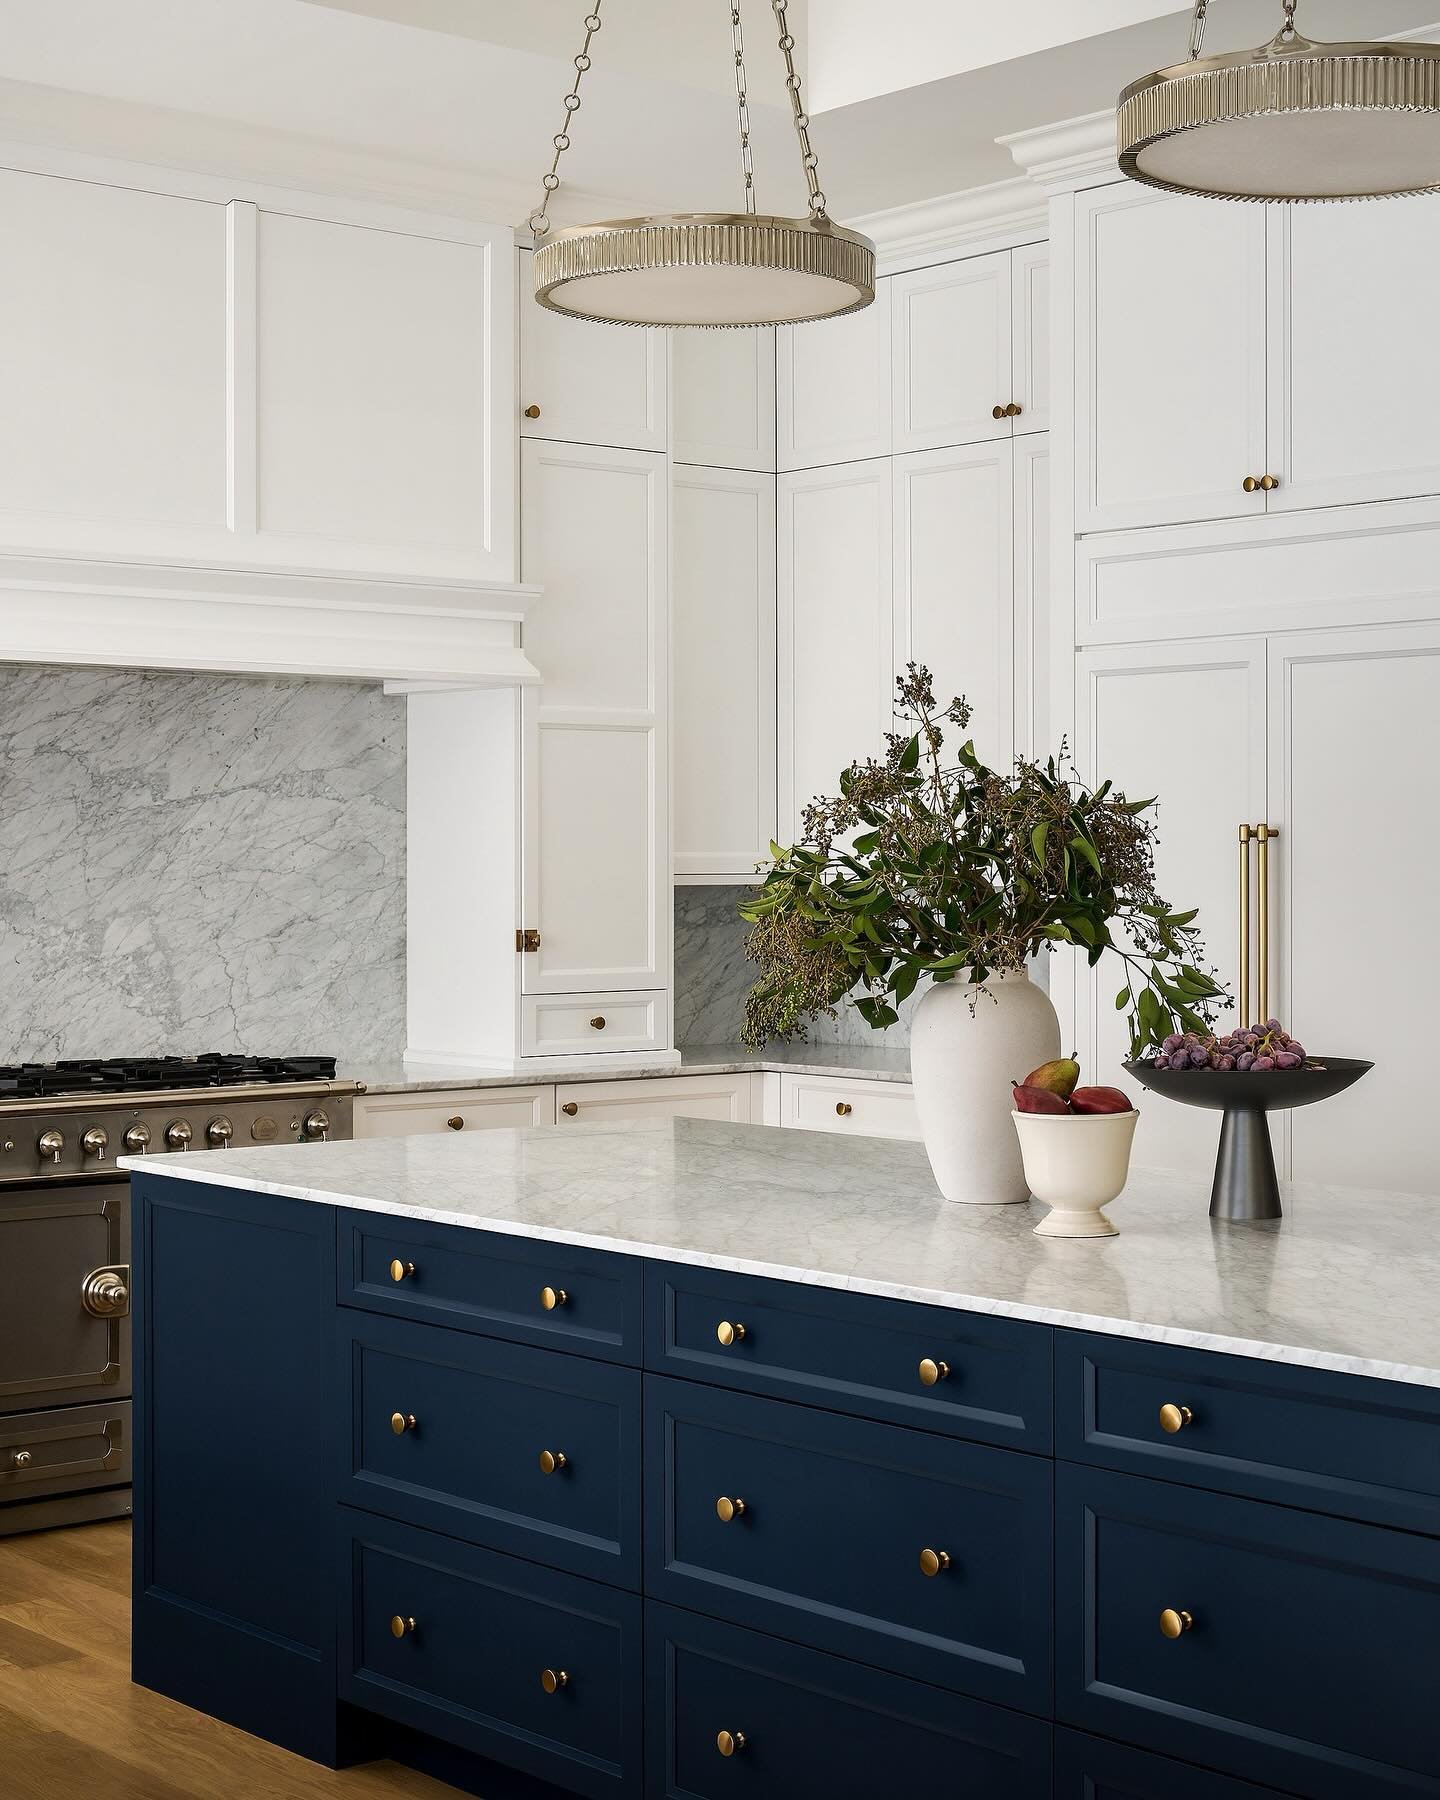 Carrera marble, custom cabinetry, and an island built for gathering form a winning combo at a Glenview new construction project with A. Perry Homes.

@home_builder @abruzzokb @calia_stone_boutique 

Photo: @rymcdon

#londonwalderinteriordesign #lwid 